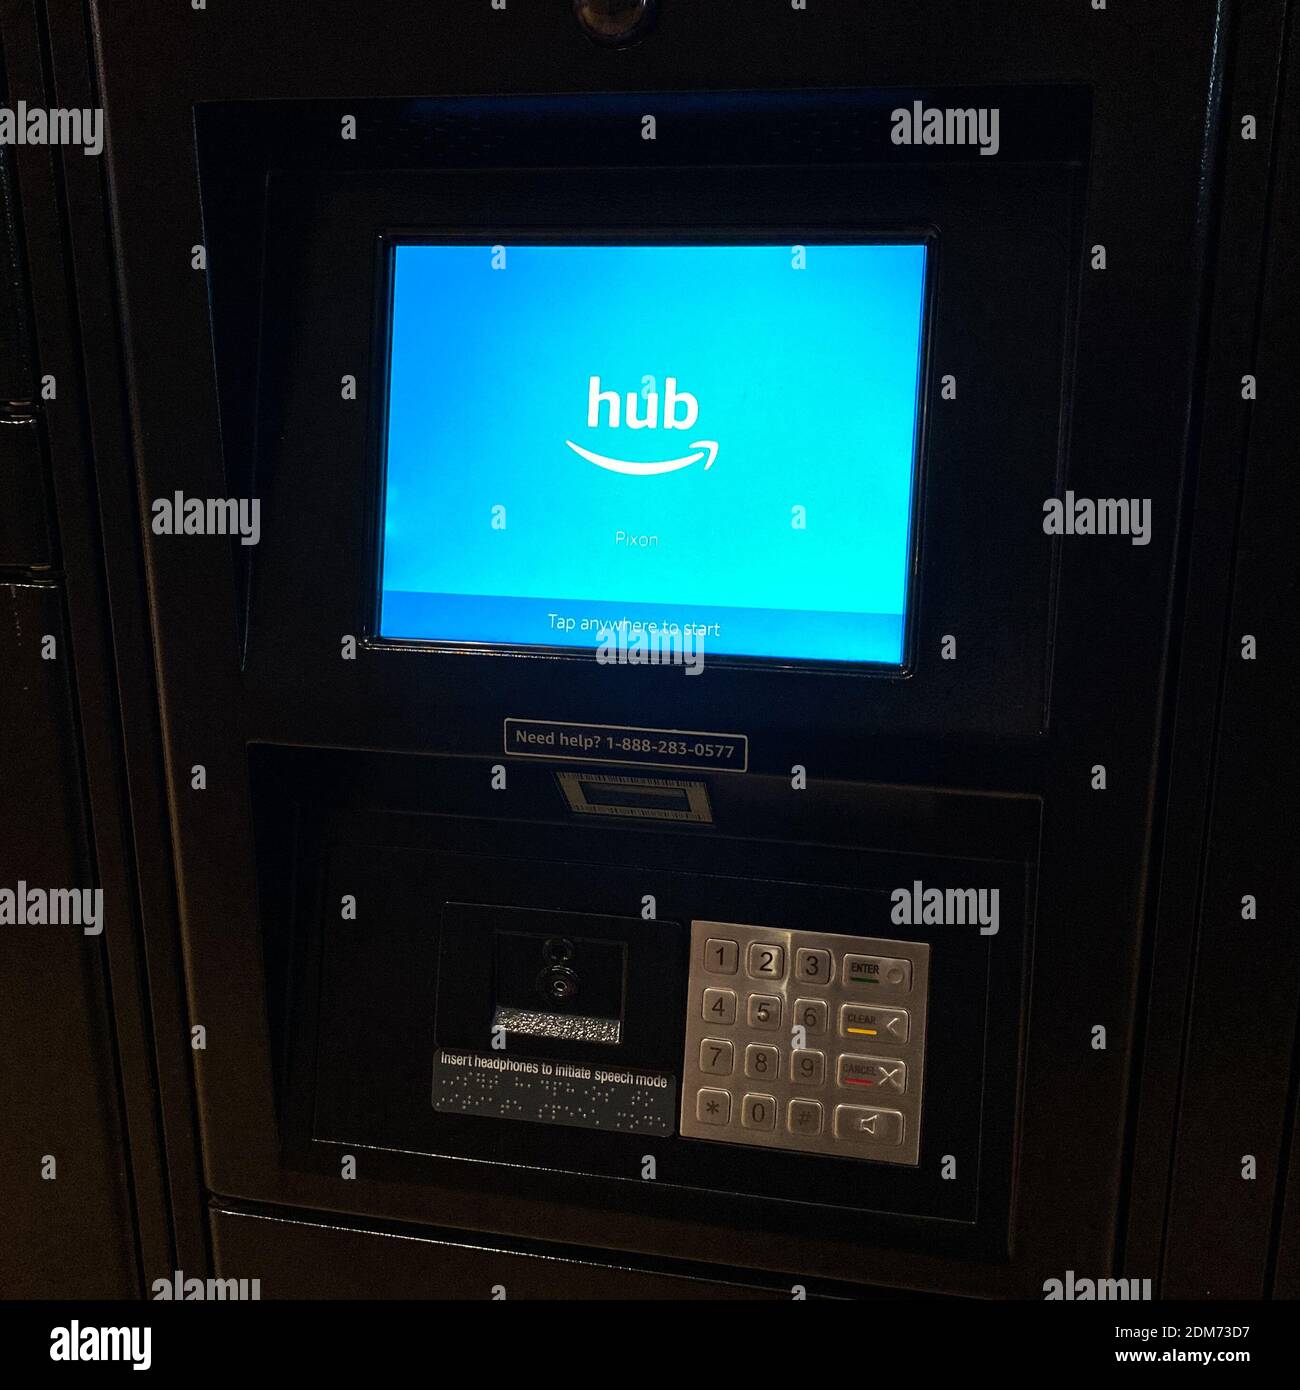 Orlando, FL USA - July 6, 2020:  An Amazon hub locker in an apartment complex where packages are delivered safely to residents. Stock Photo